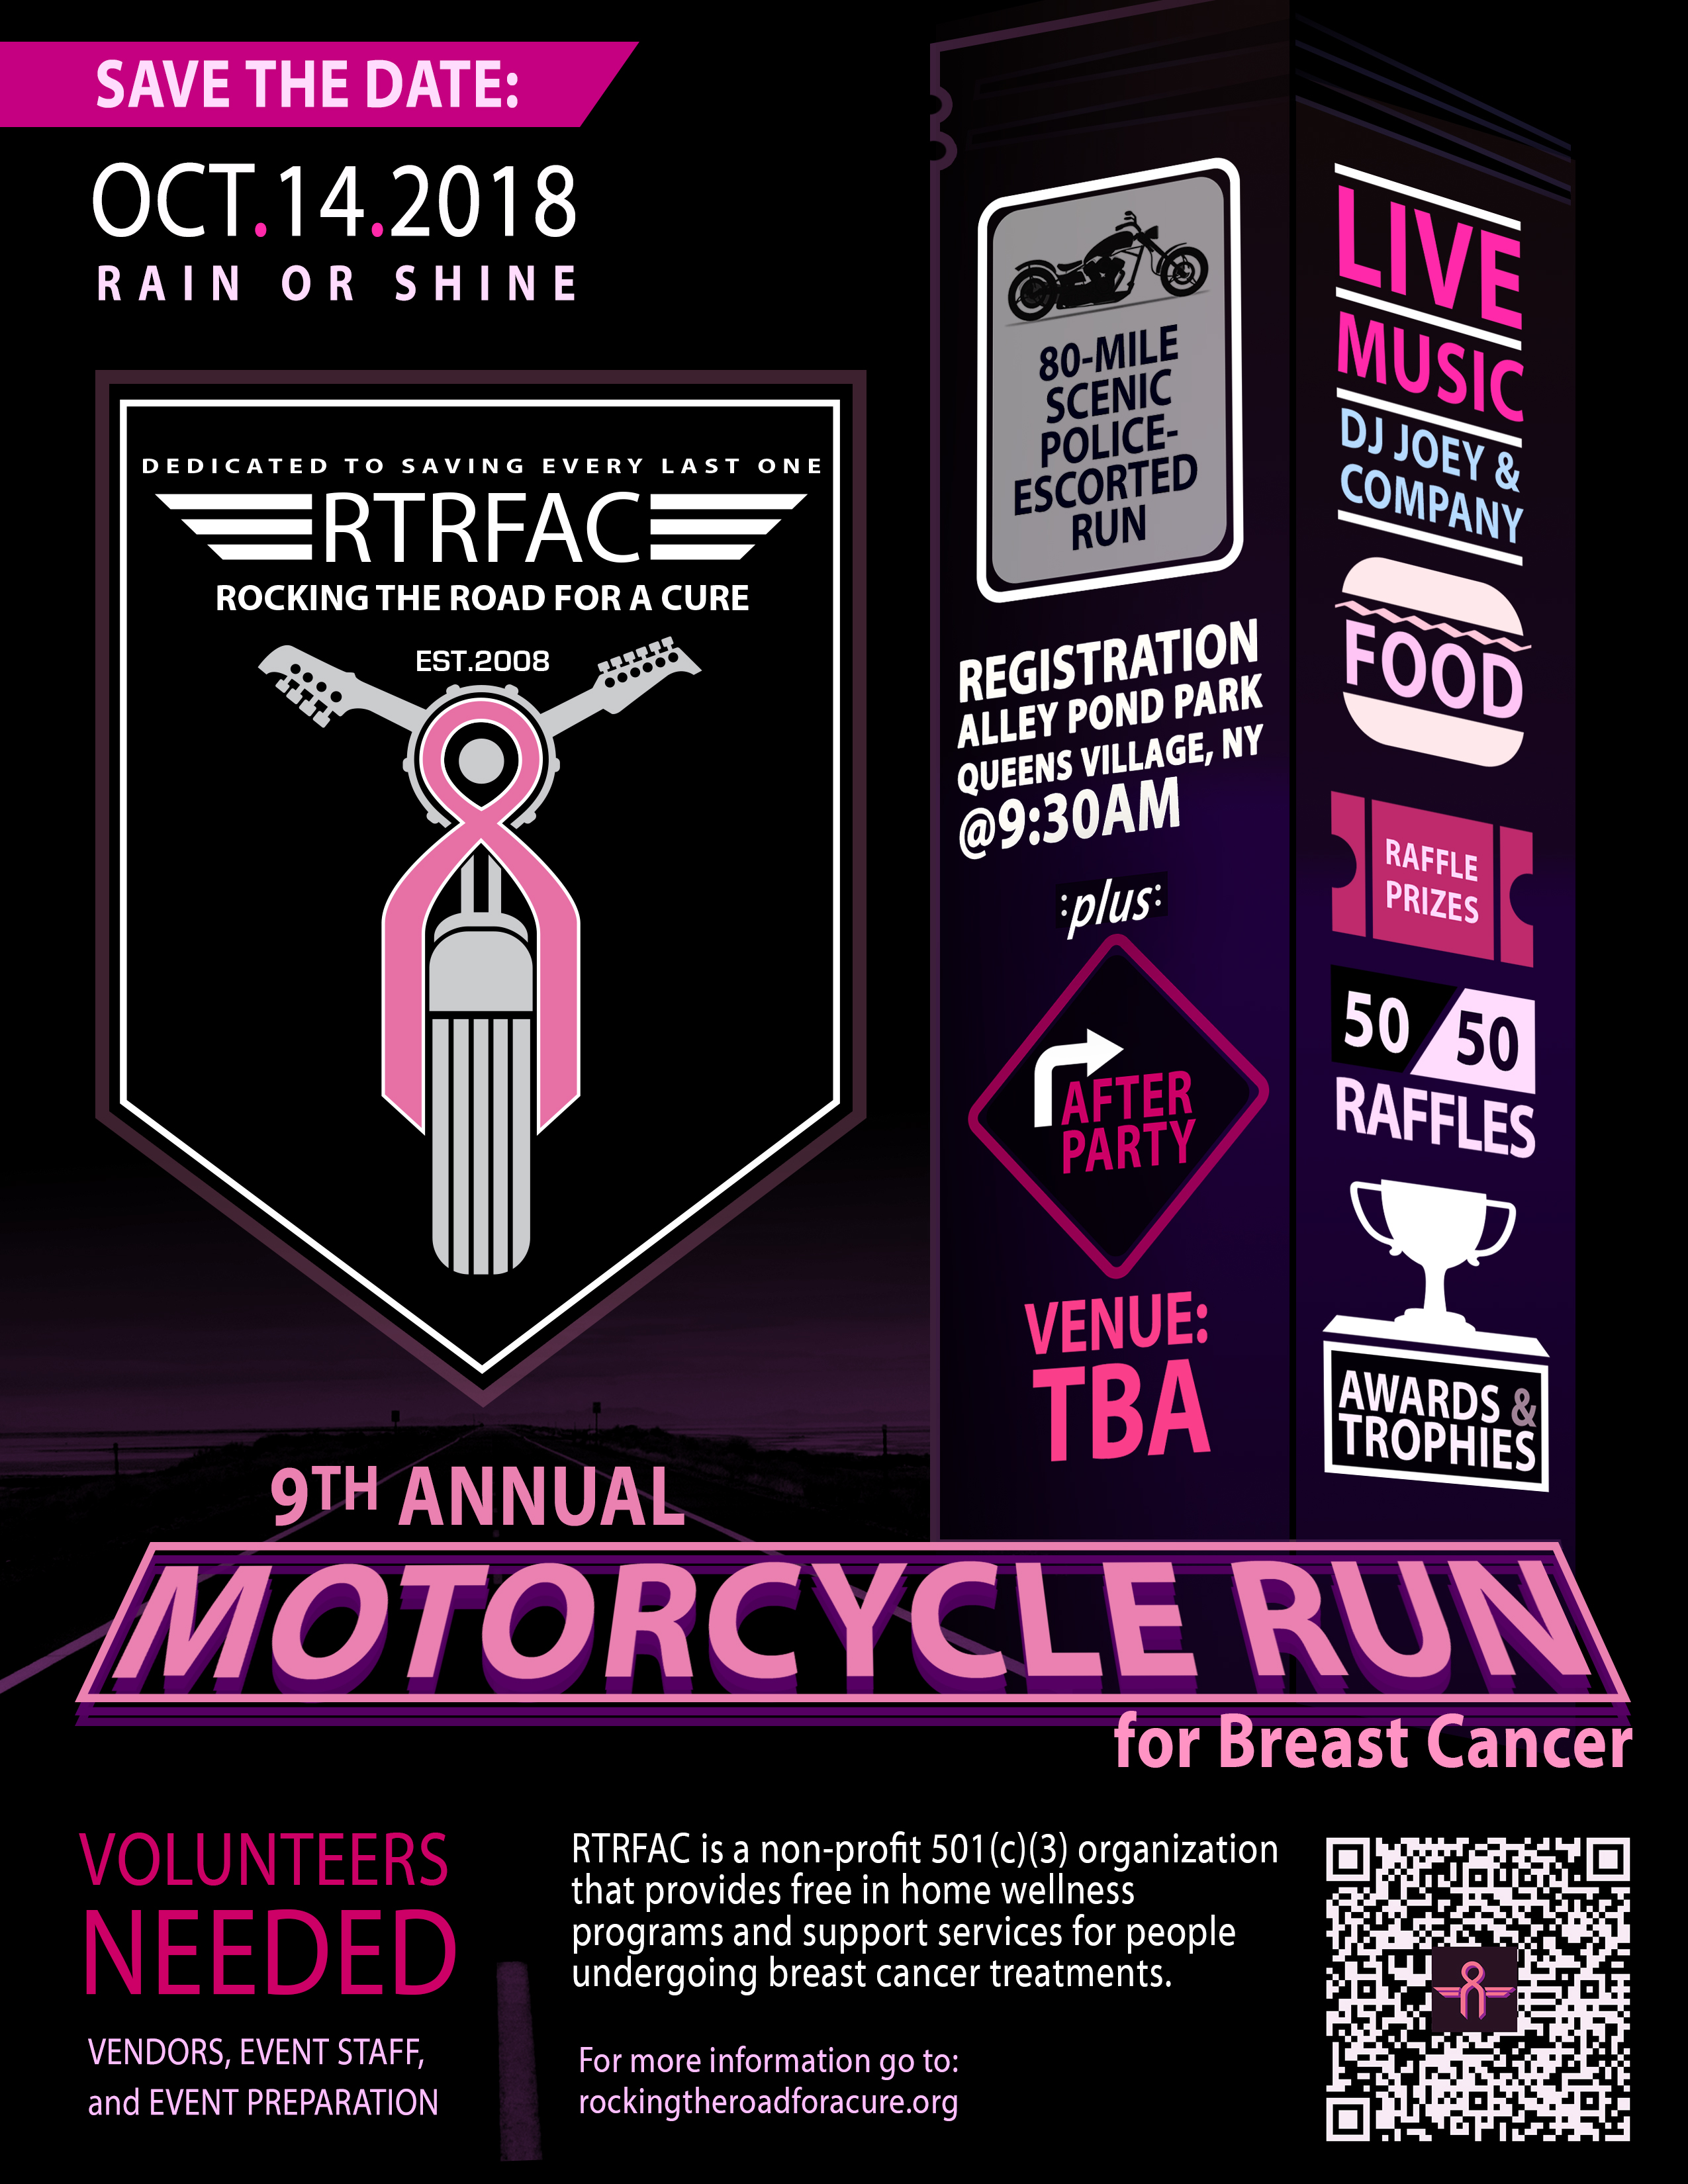 9th Annual Motorcycle Run for Breast Cancer 2018